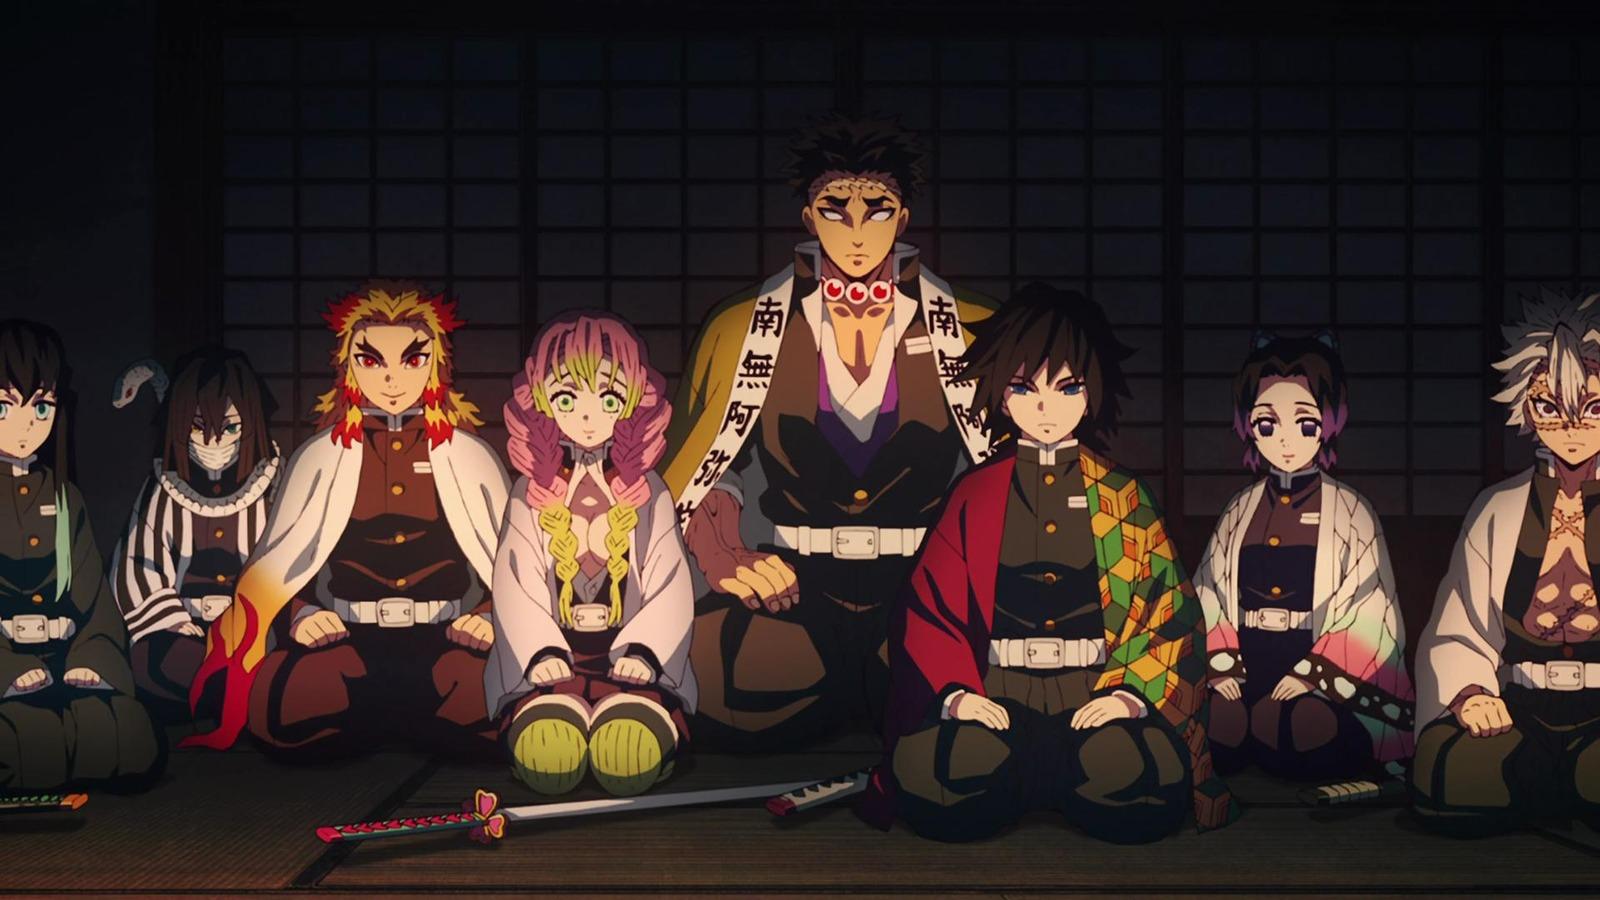 An image of all the Hashira from Demon Slayer